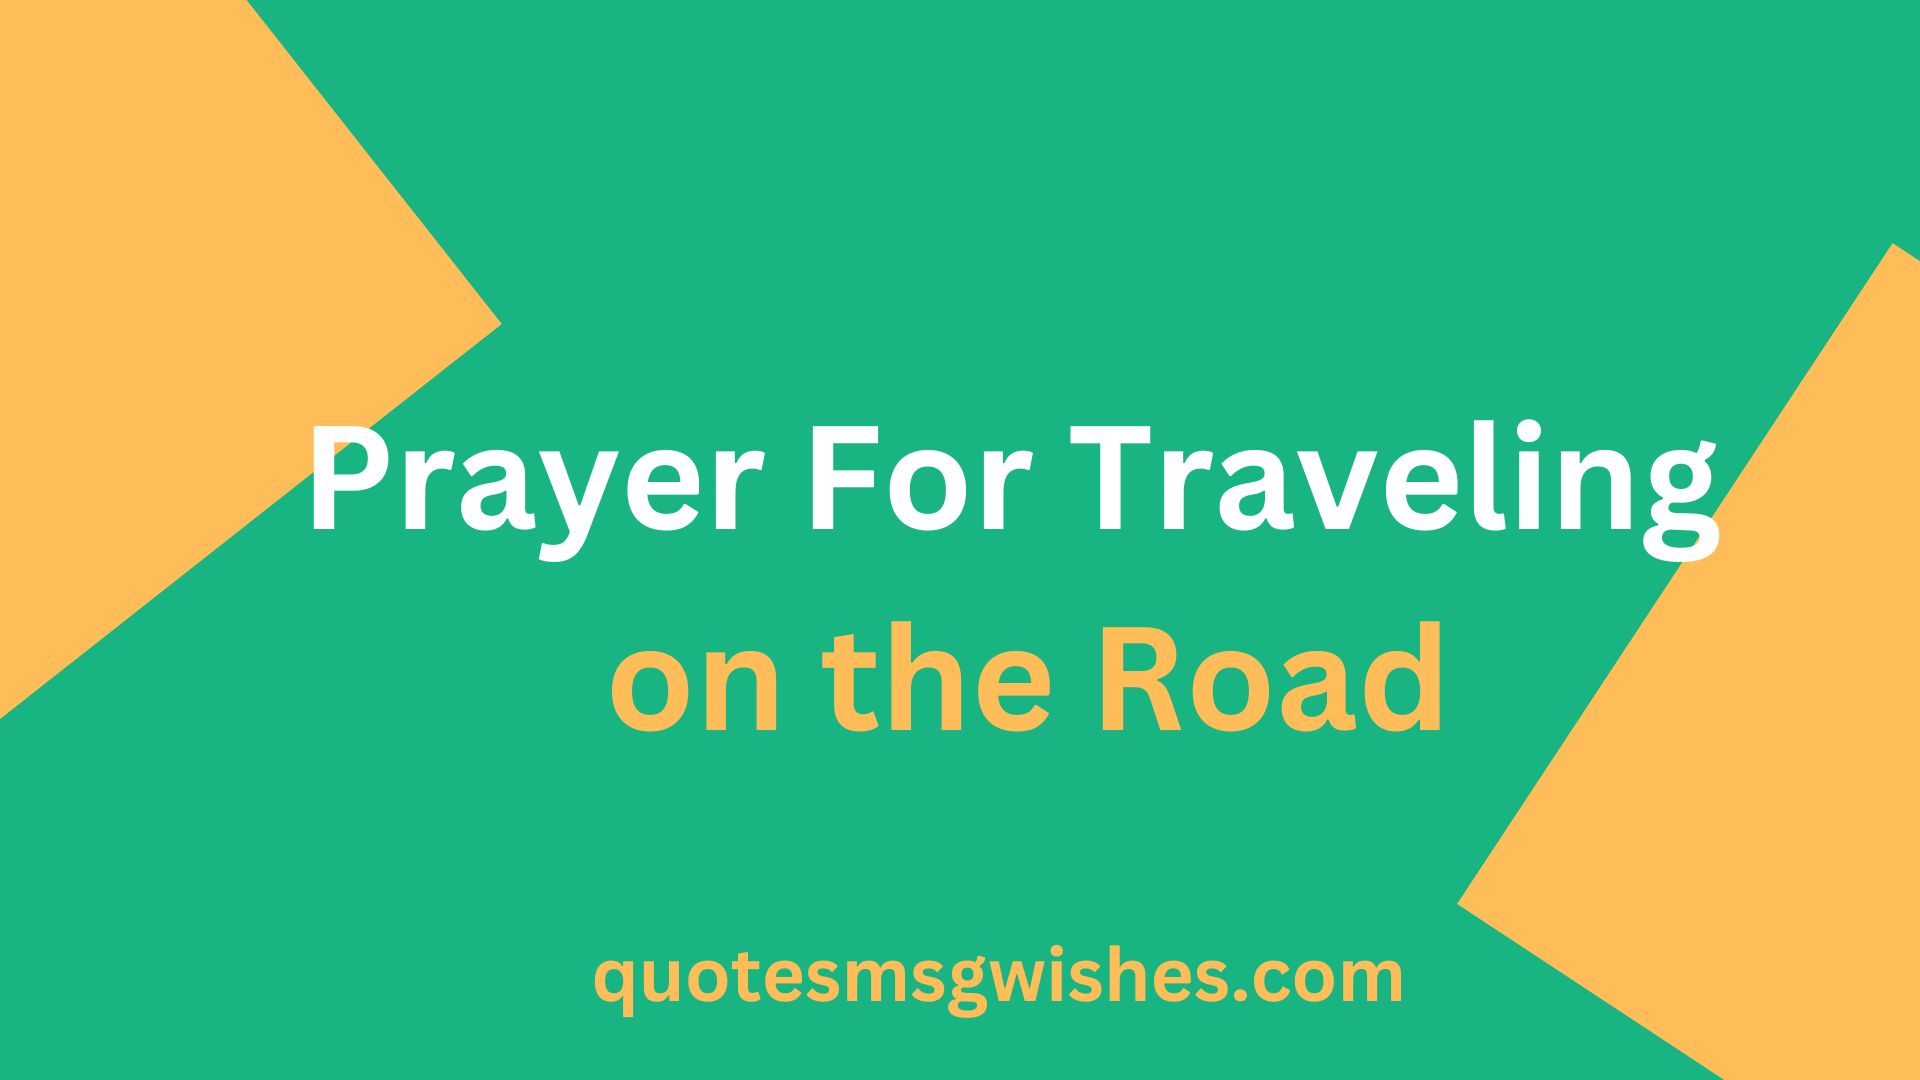 Prayer For Traveling on the Road